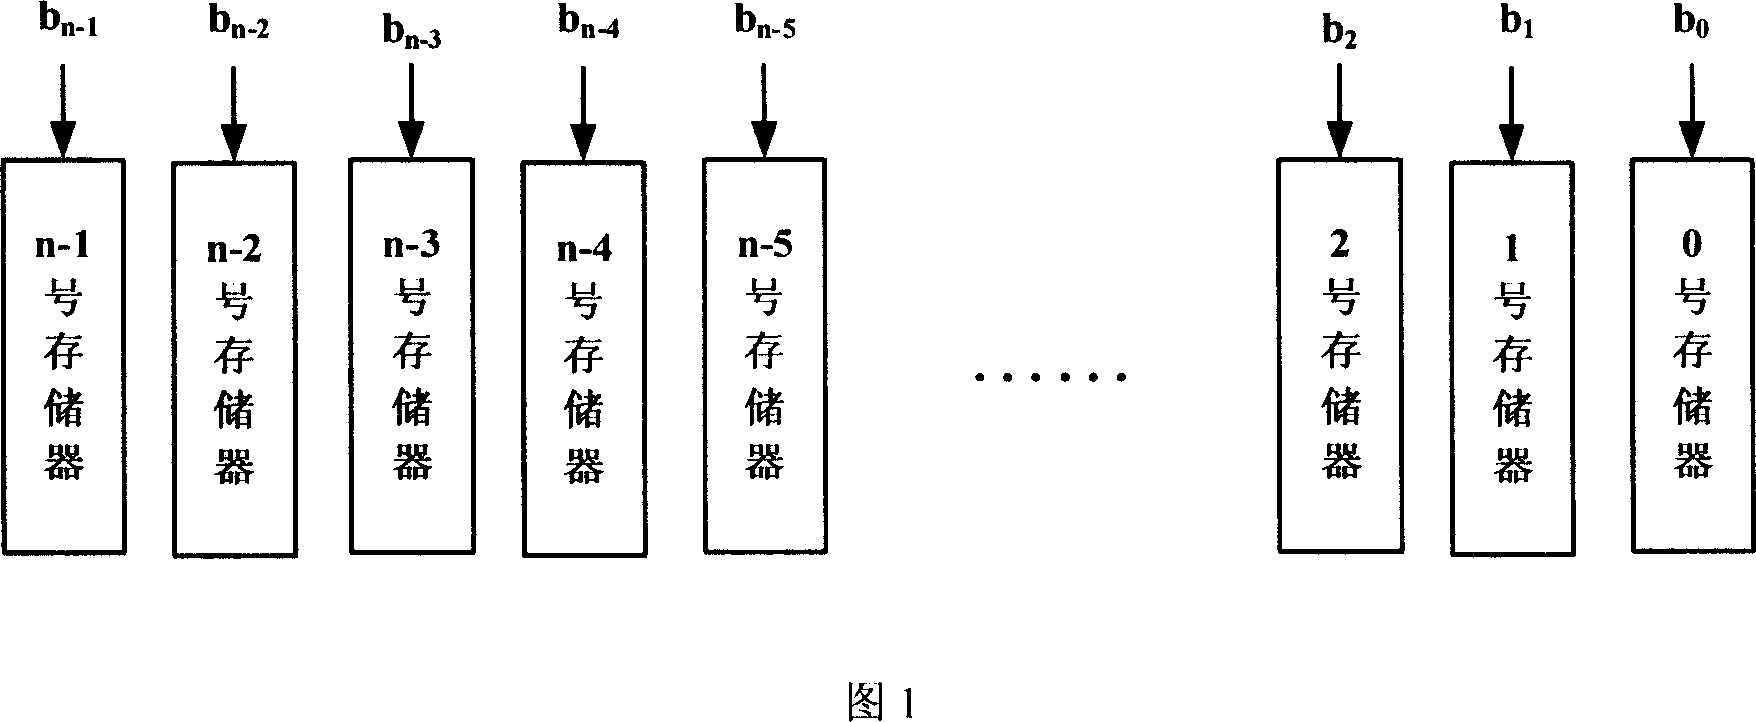 Coding and decoding method and application used for reliable storing or transmitting data